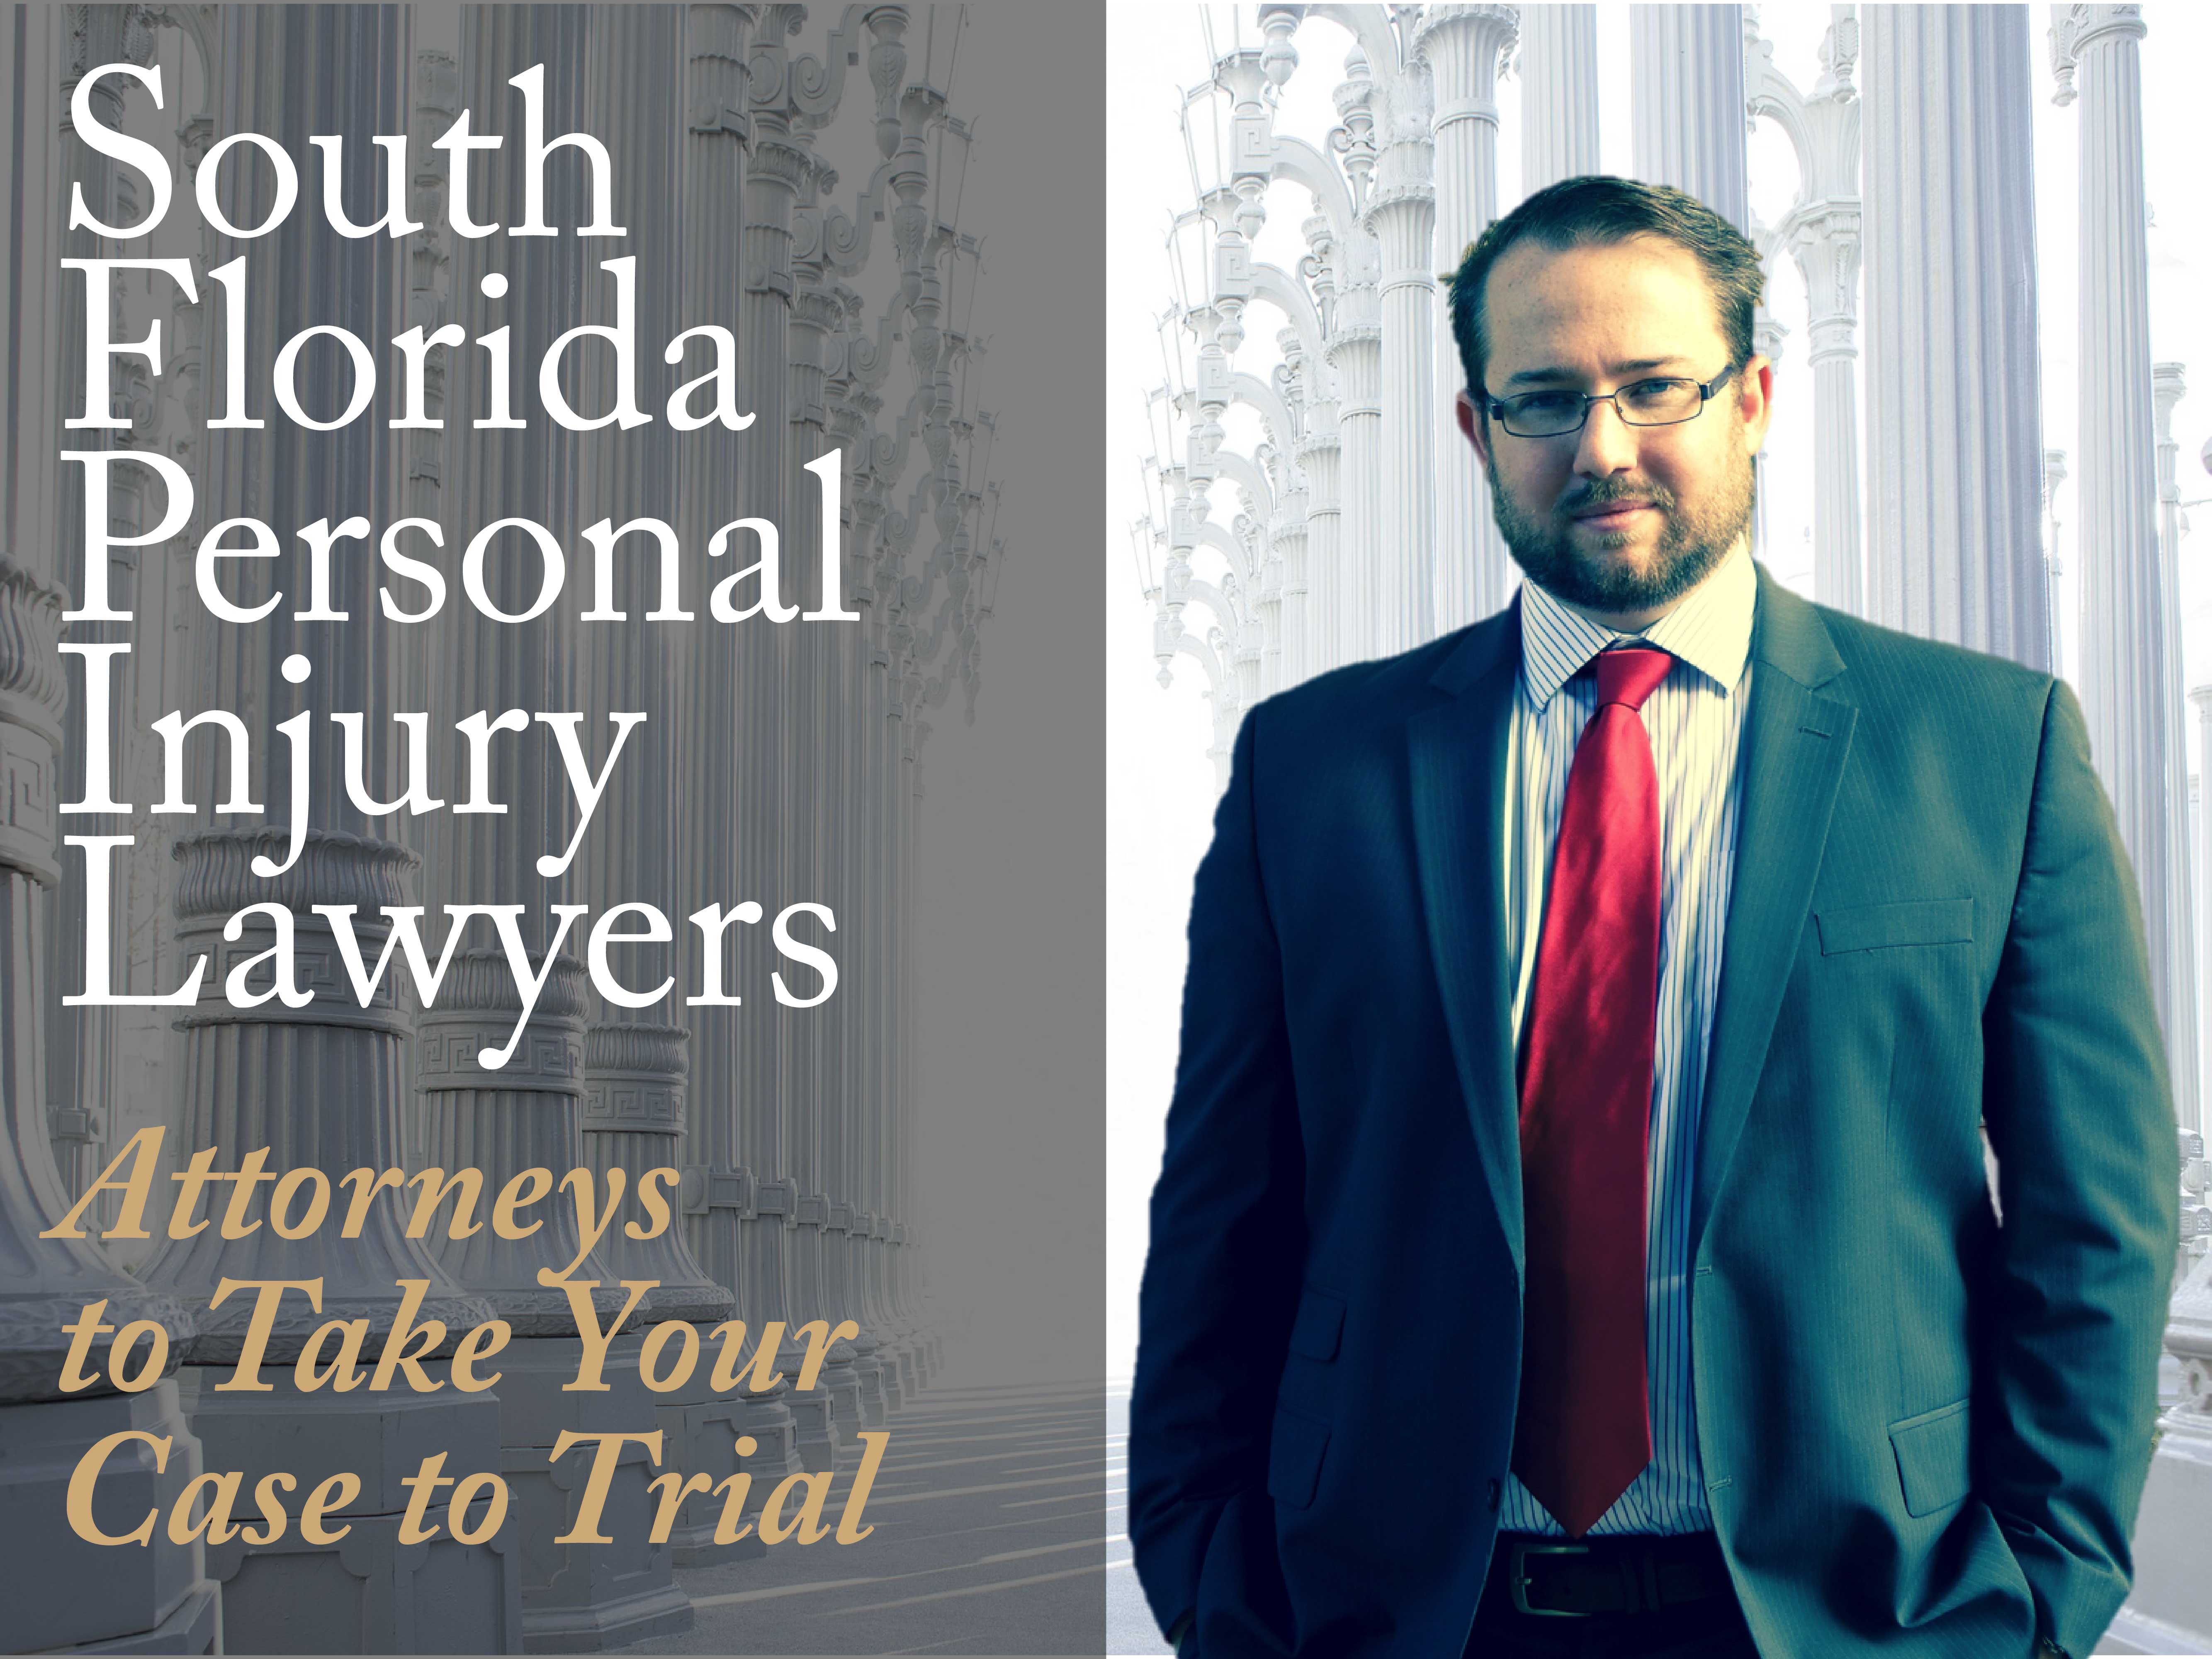 South Florida Personal Injury Lawyers Attorneys to Take Your Case to Trial